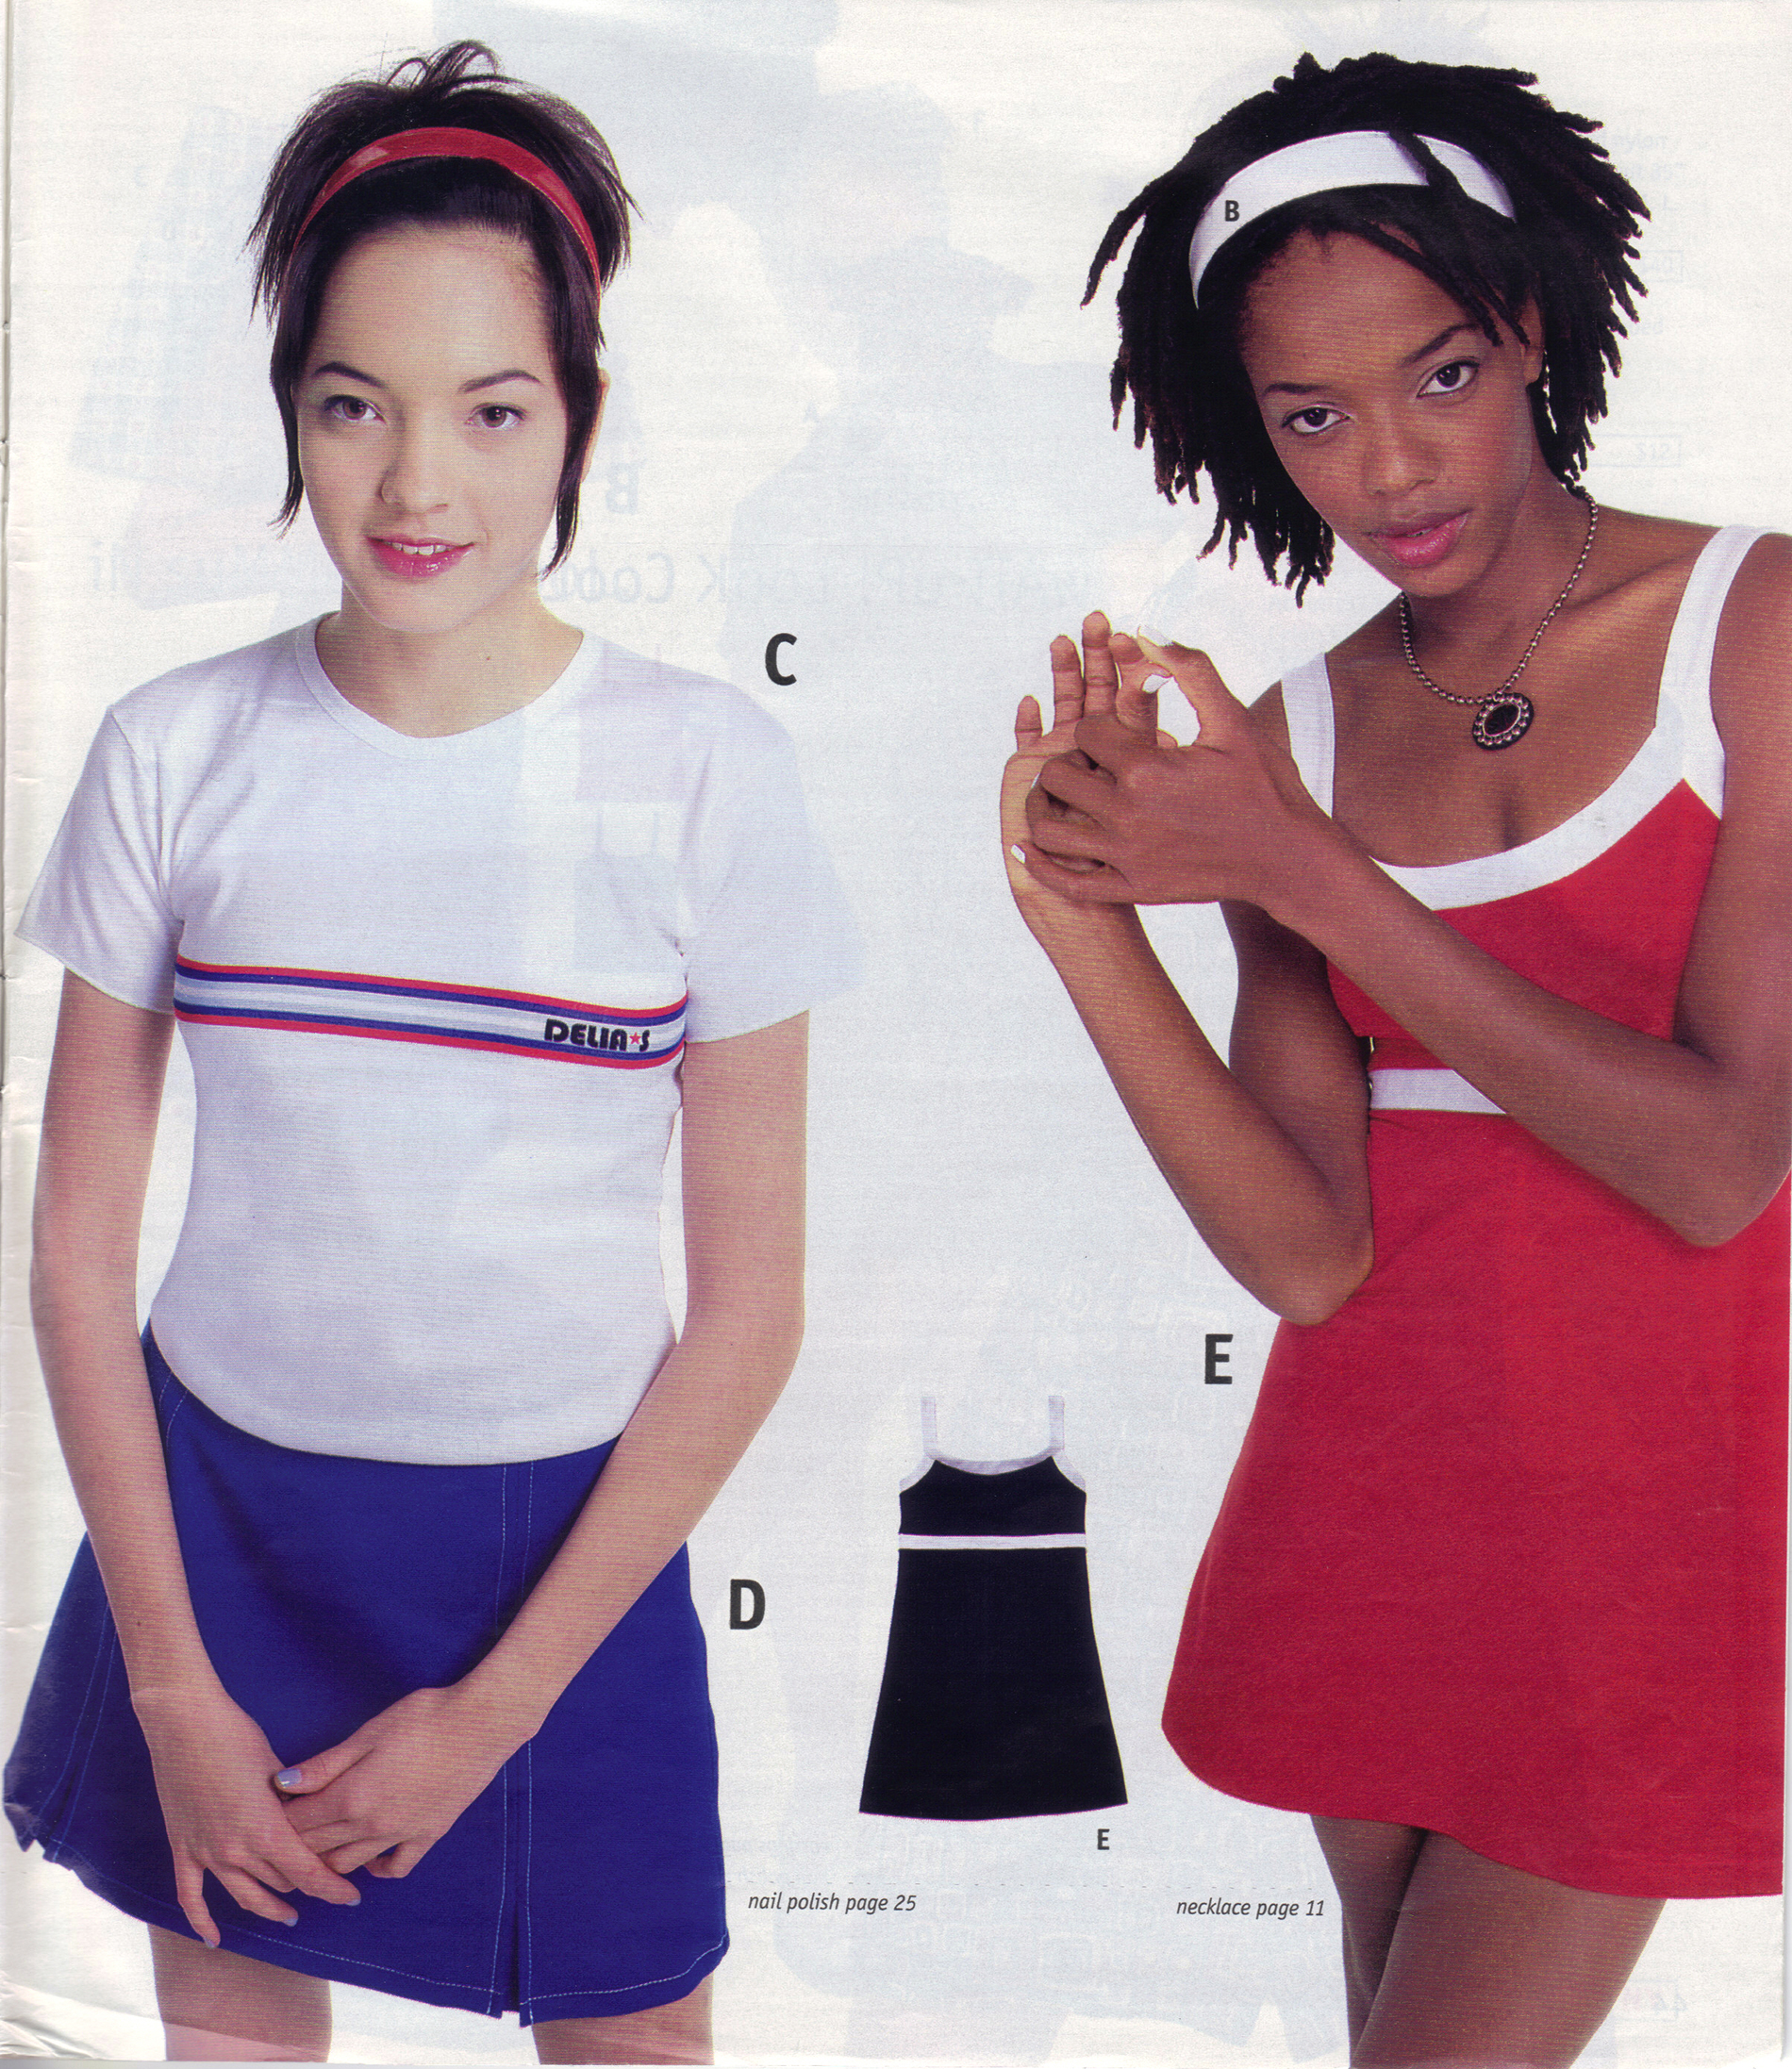 There's a Tumblr Just for dELia*s Catalogs, and We're Having 90s Fashion  Flashbacks